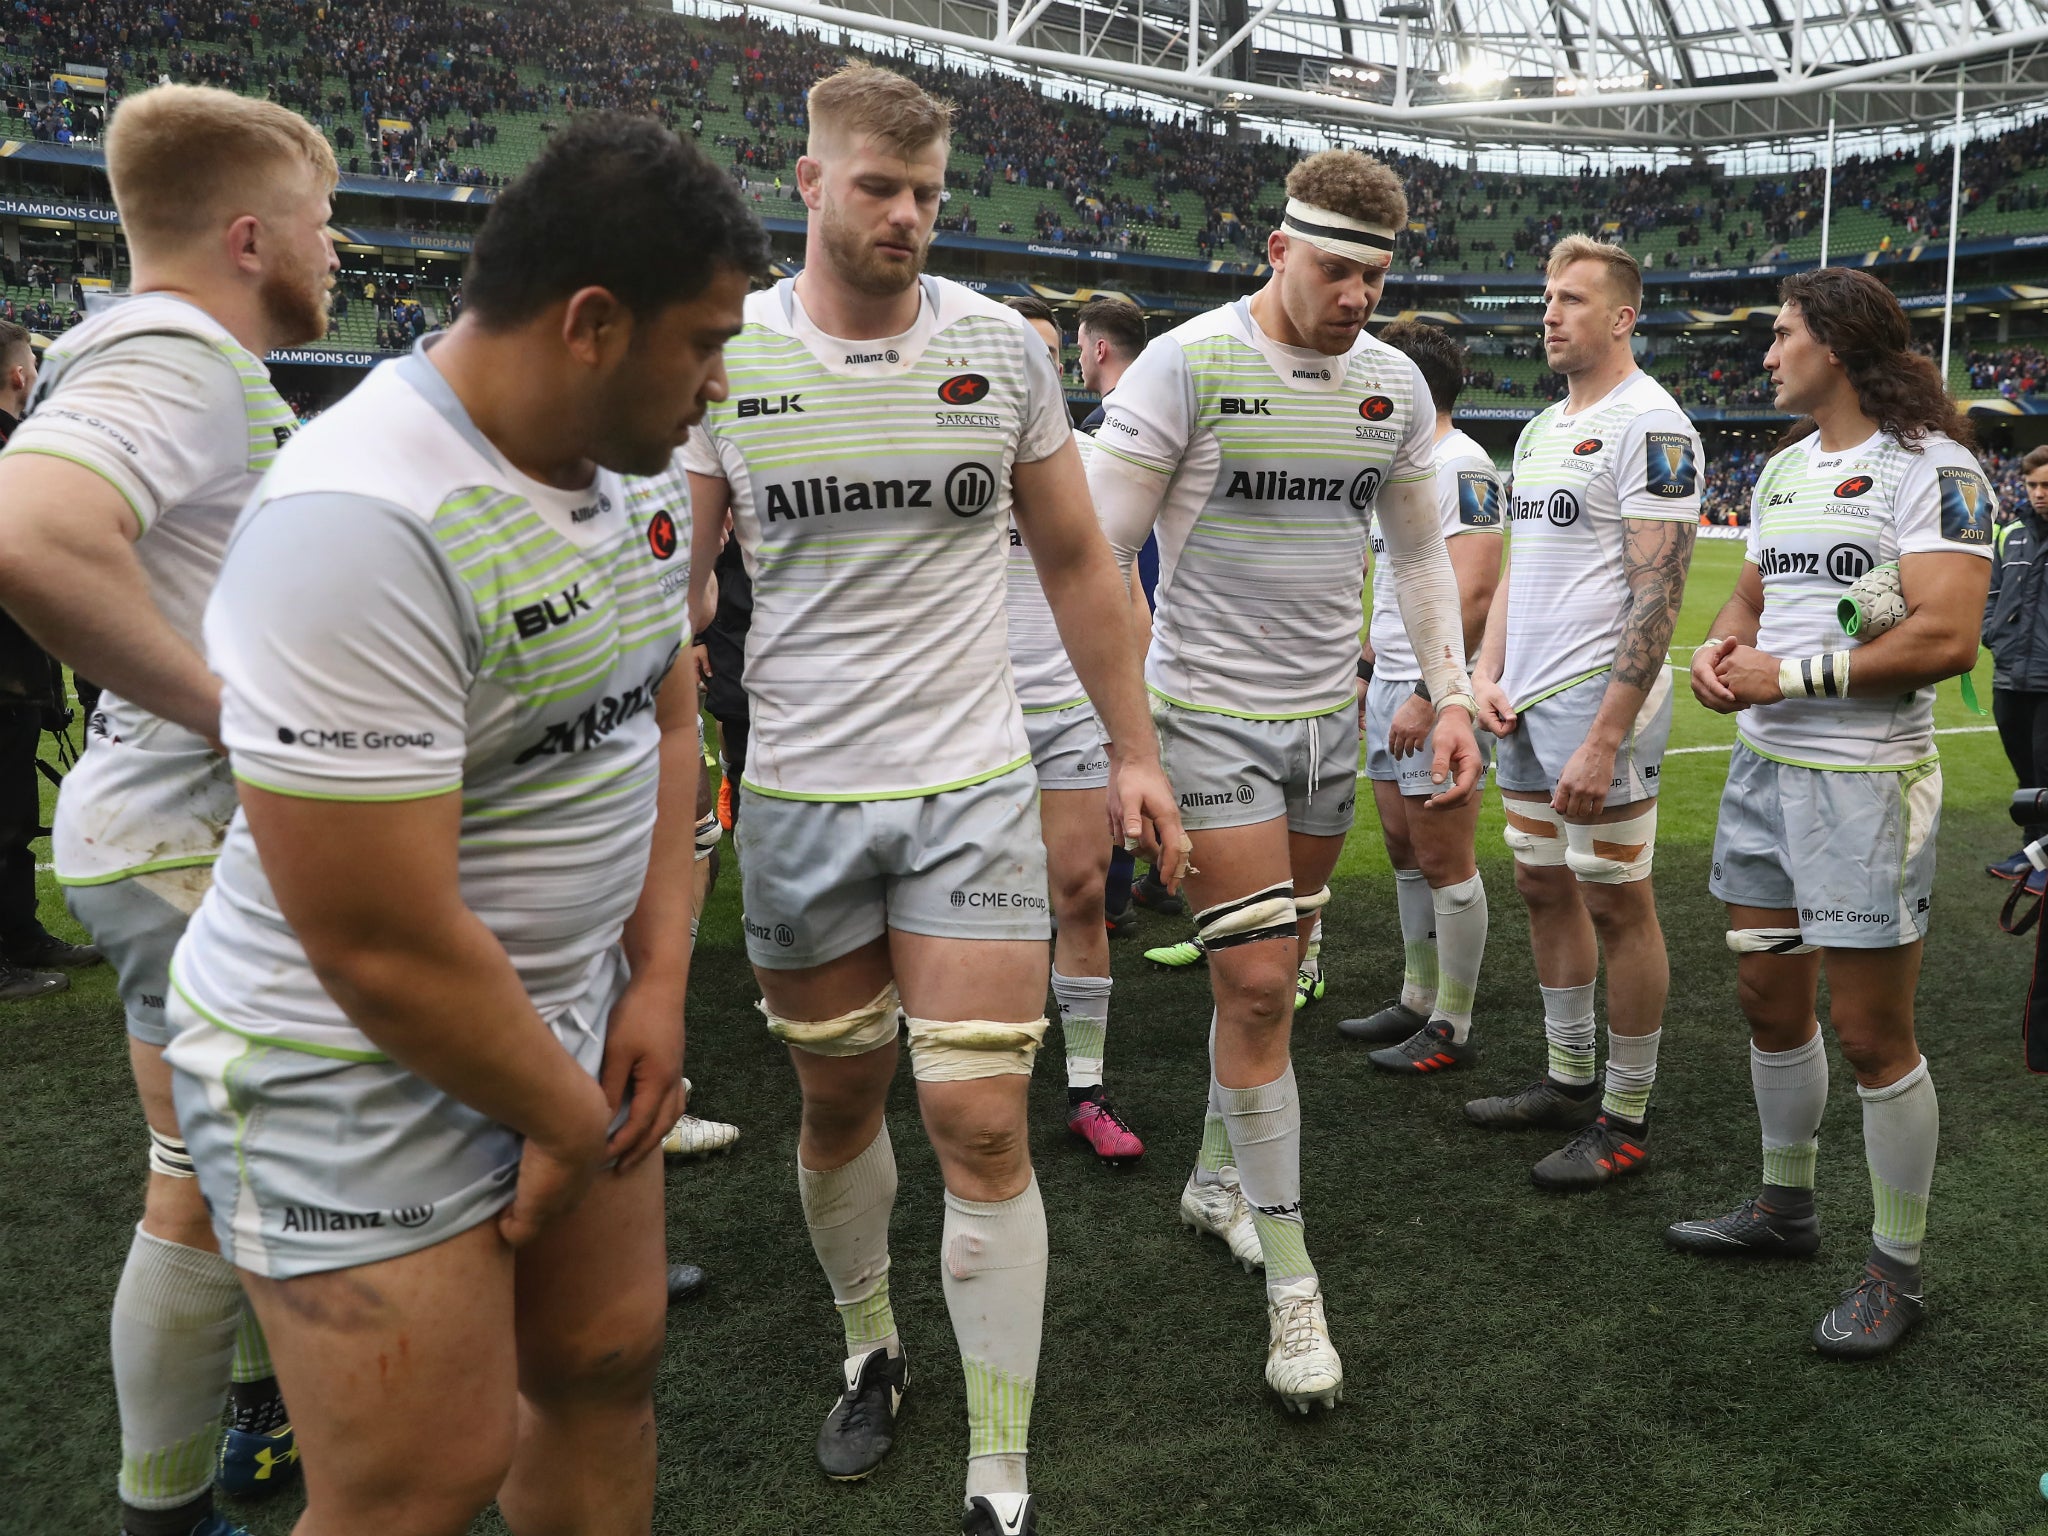 Saracens are regrouping on and off the field after Sunday’s European Cup loss to Leinster in Dublin